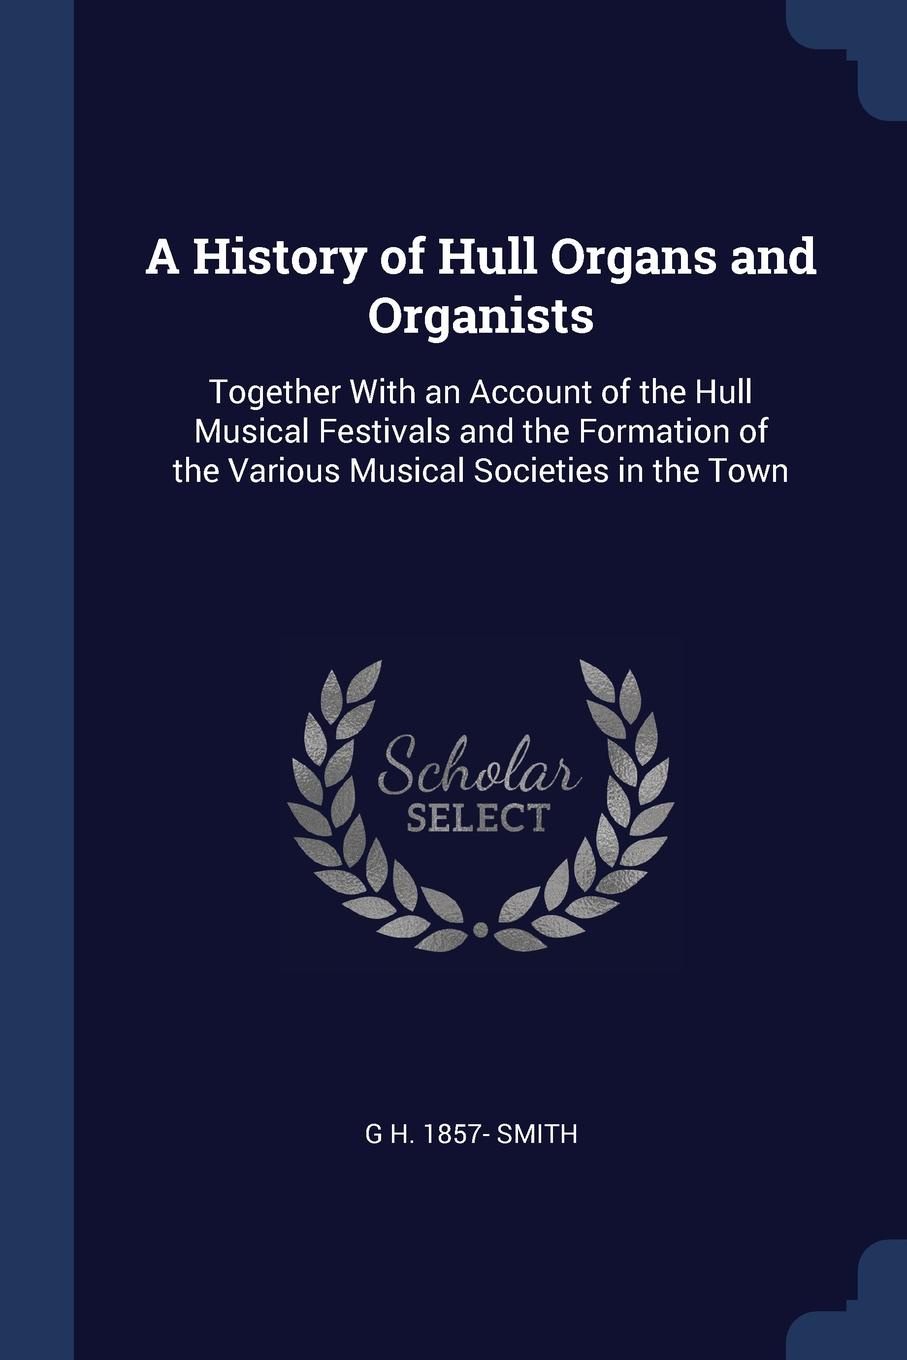 A History of Hull Organs and Organists. Together With an Account of the Hull Musical Festivals and the Formation of the Various Musical Societies in the Town